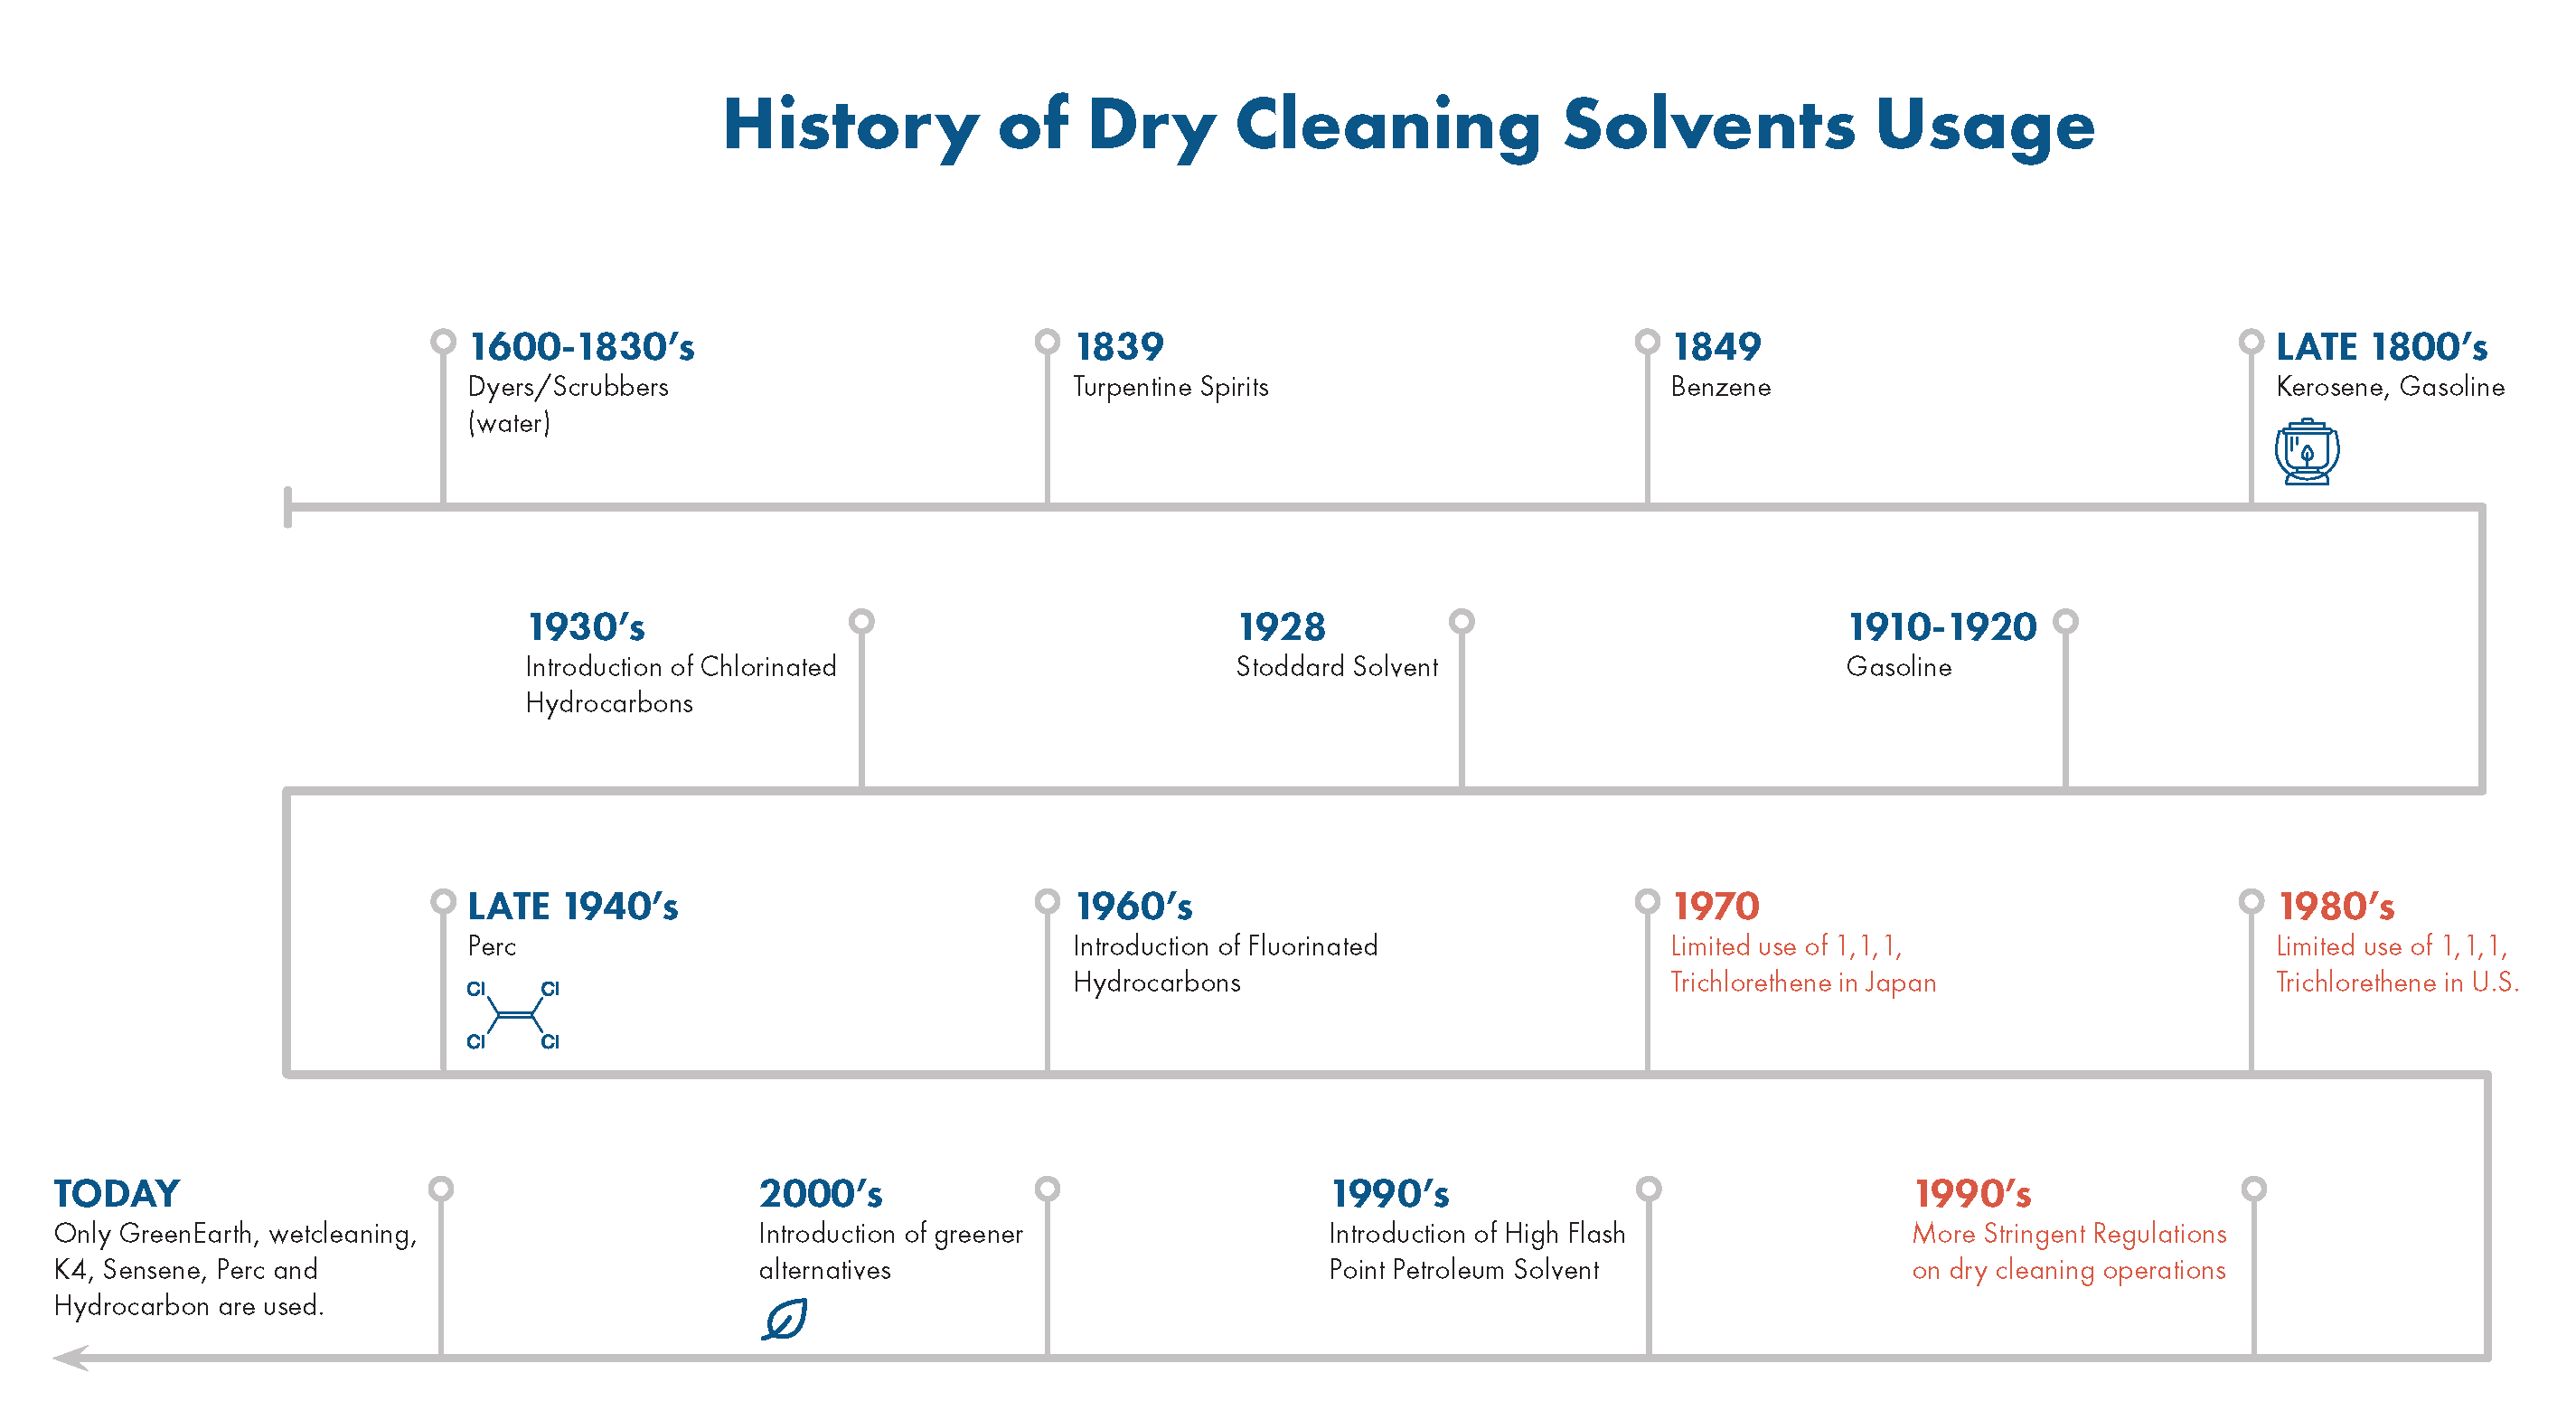 Timeline of drycleaning solvent usage between 1600 and today